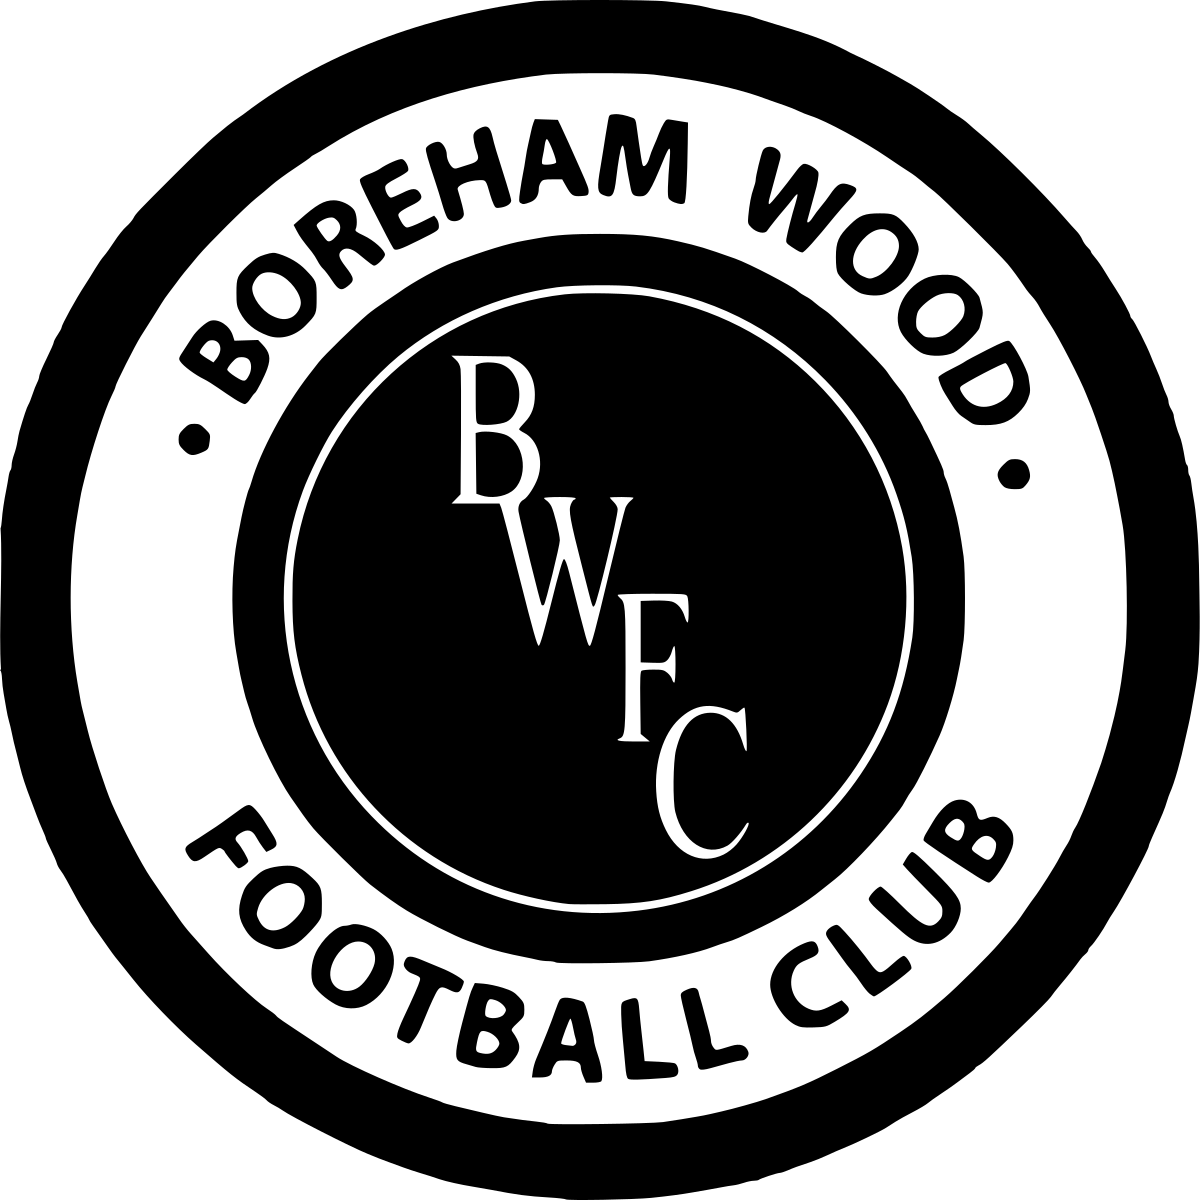 Odds and bets to soccer Boreham Wood